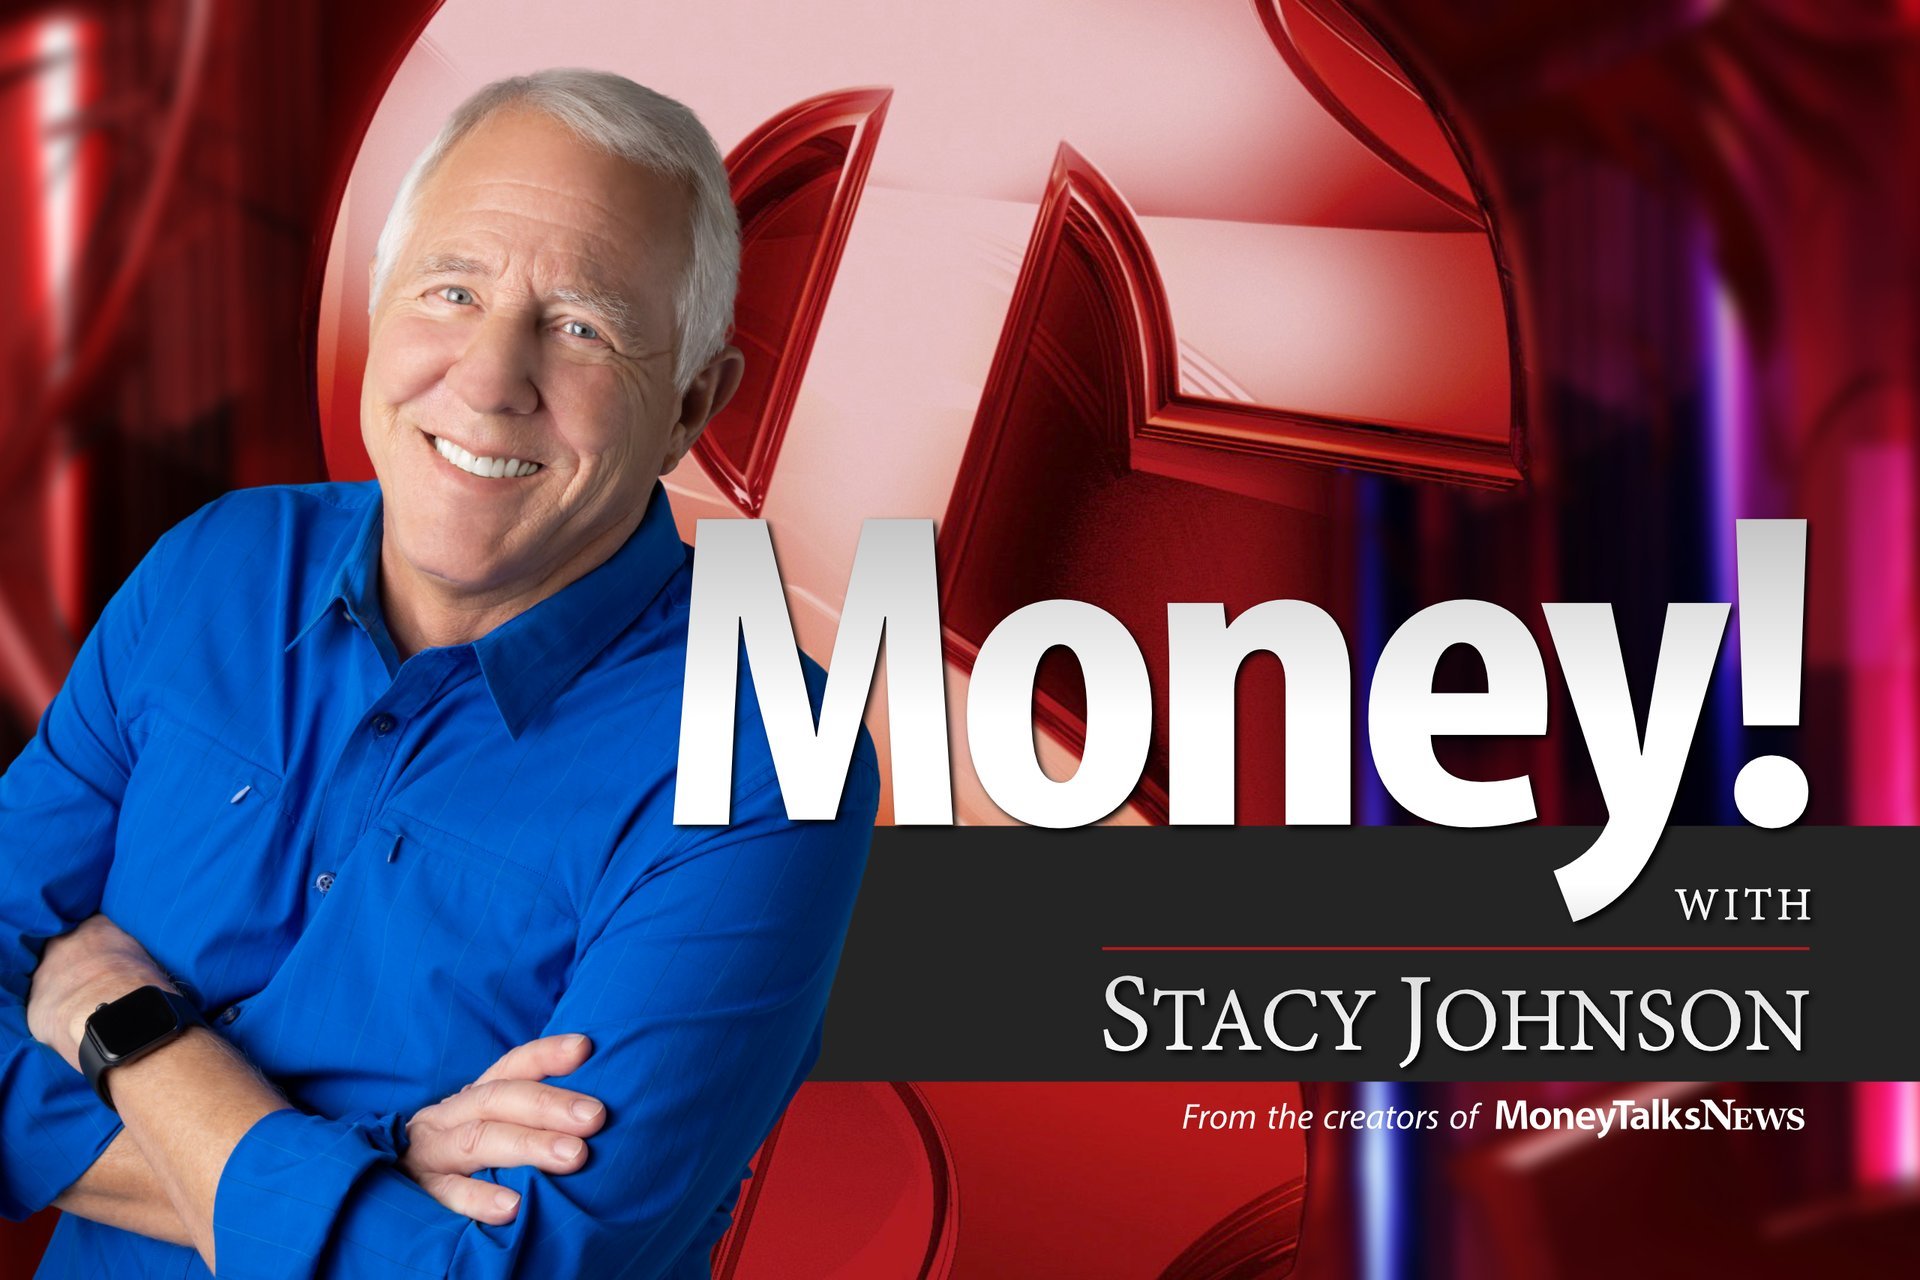 Money with Stacy Johnson